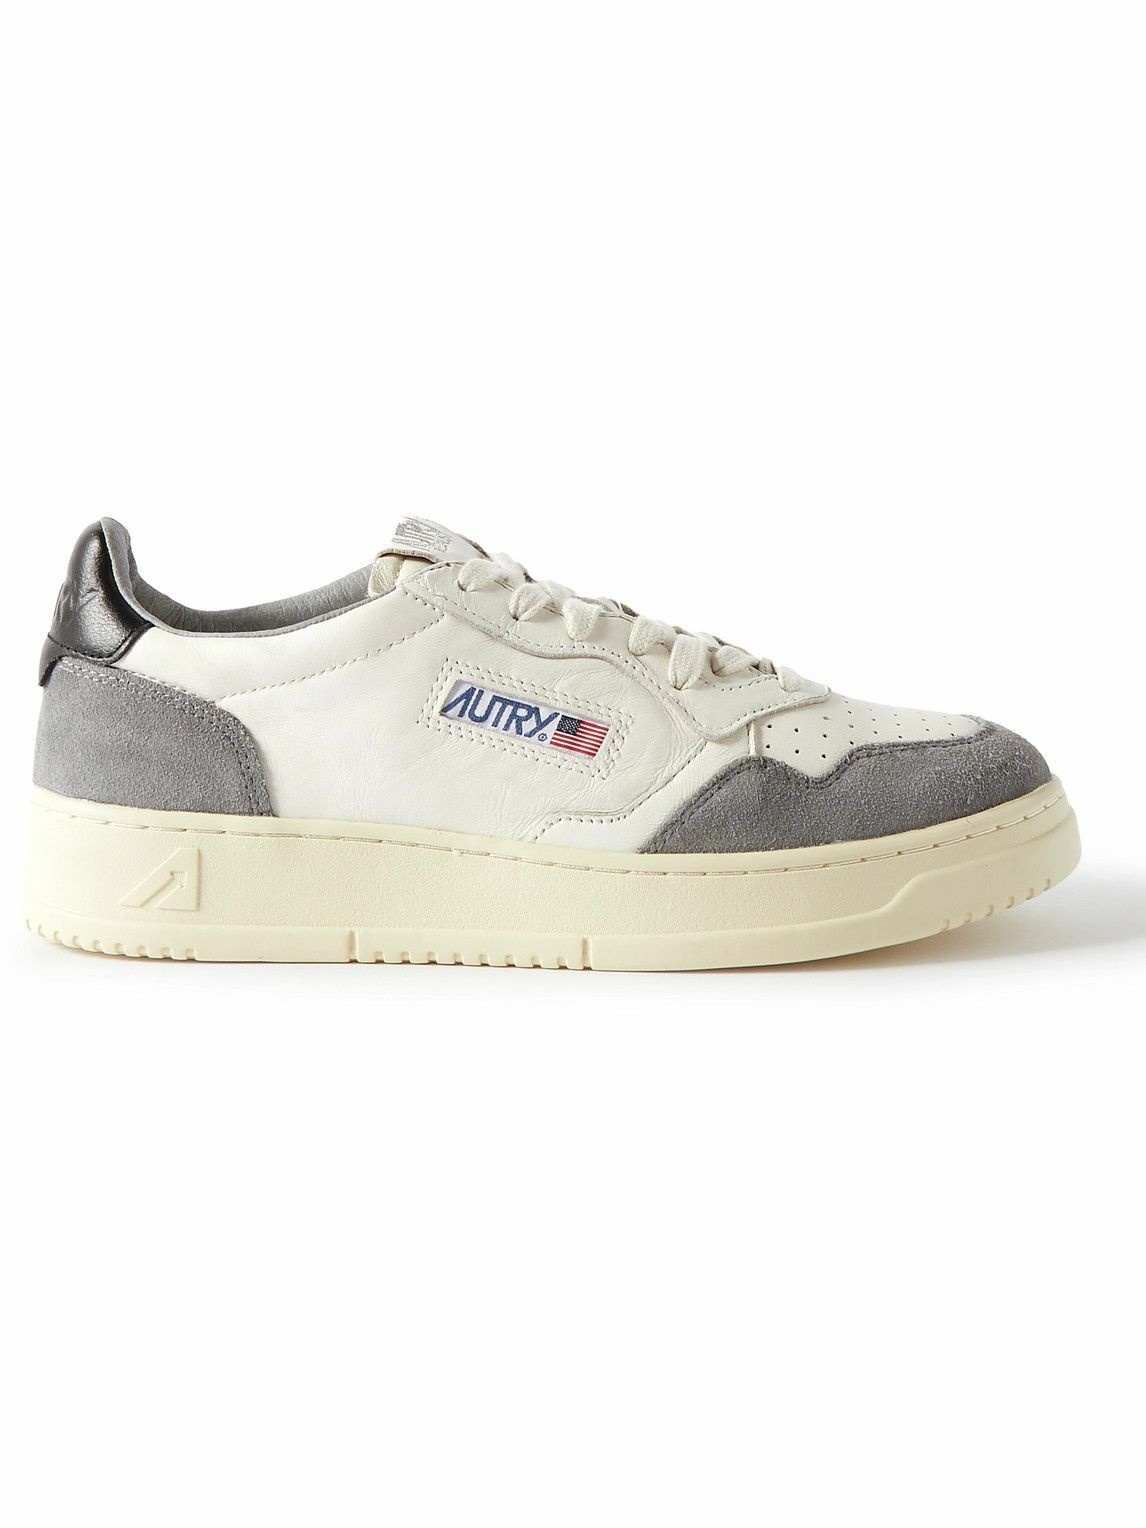 Autry - Medalist Suede-Trimmed Leather Sneakers - White Autry